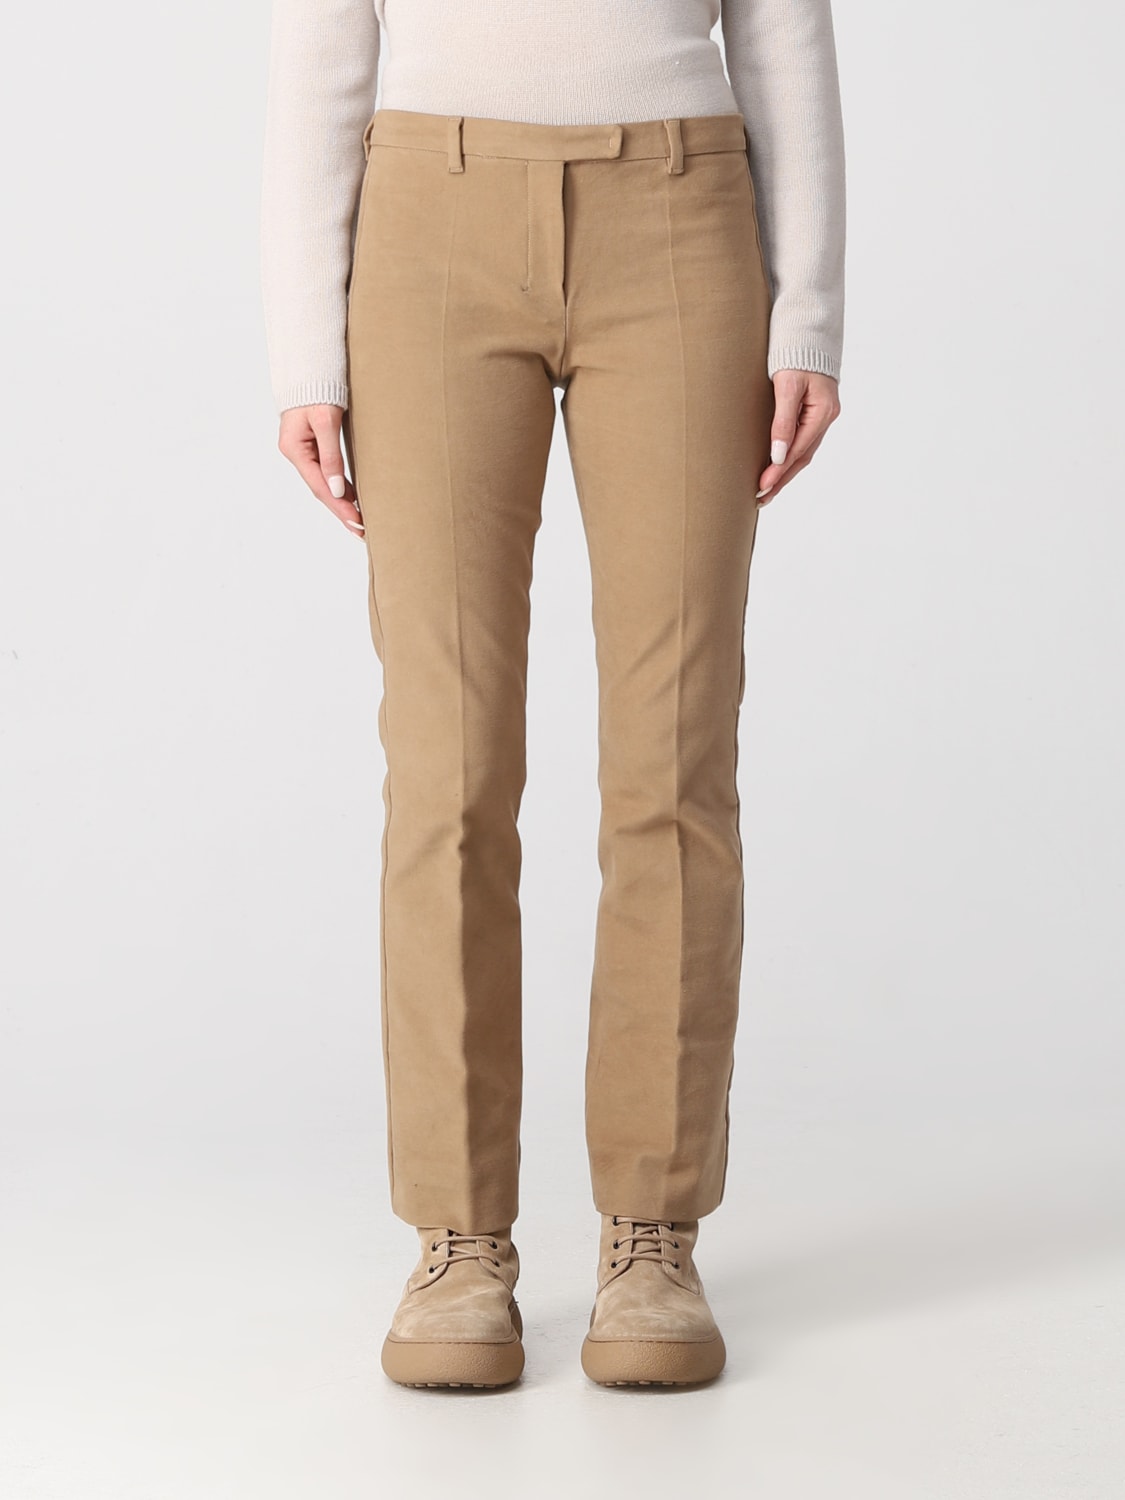 S Max Mara pants in stretch cotton